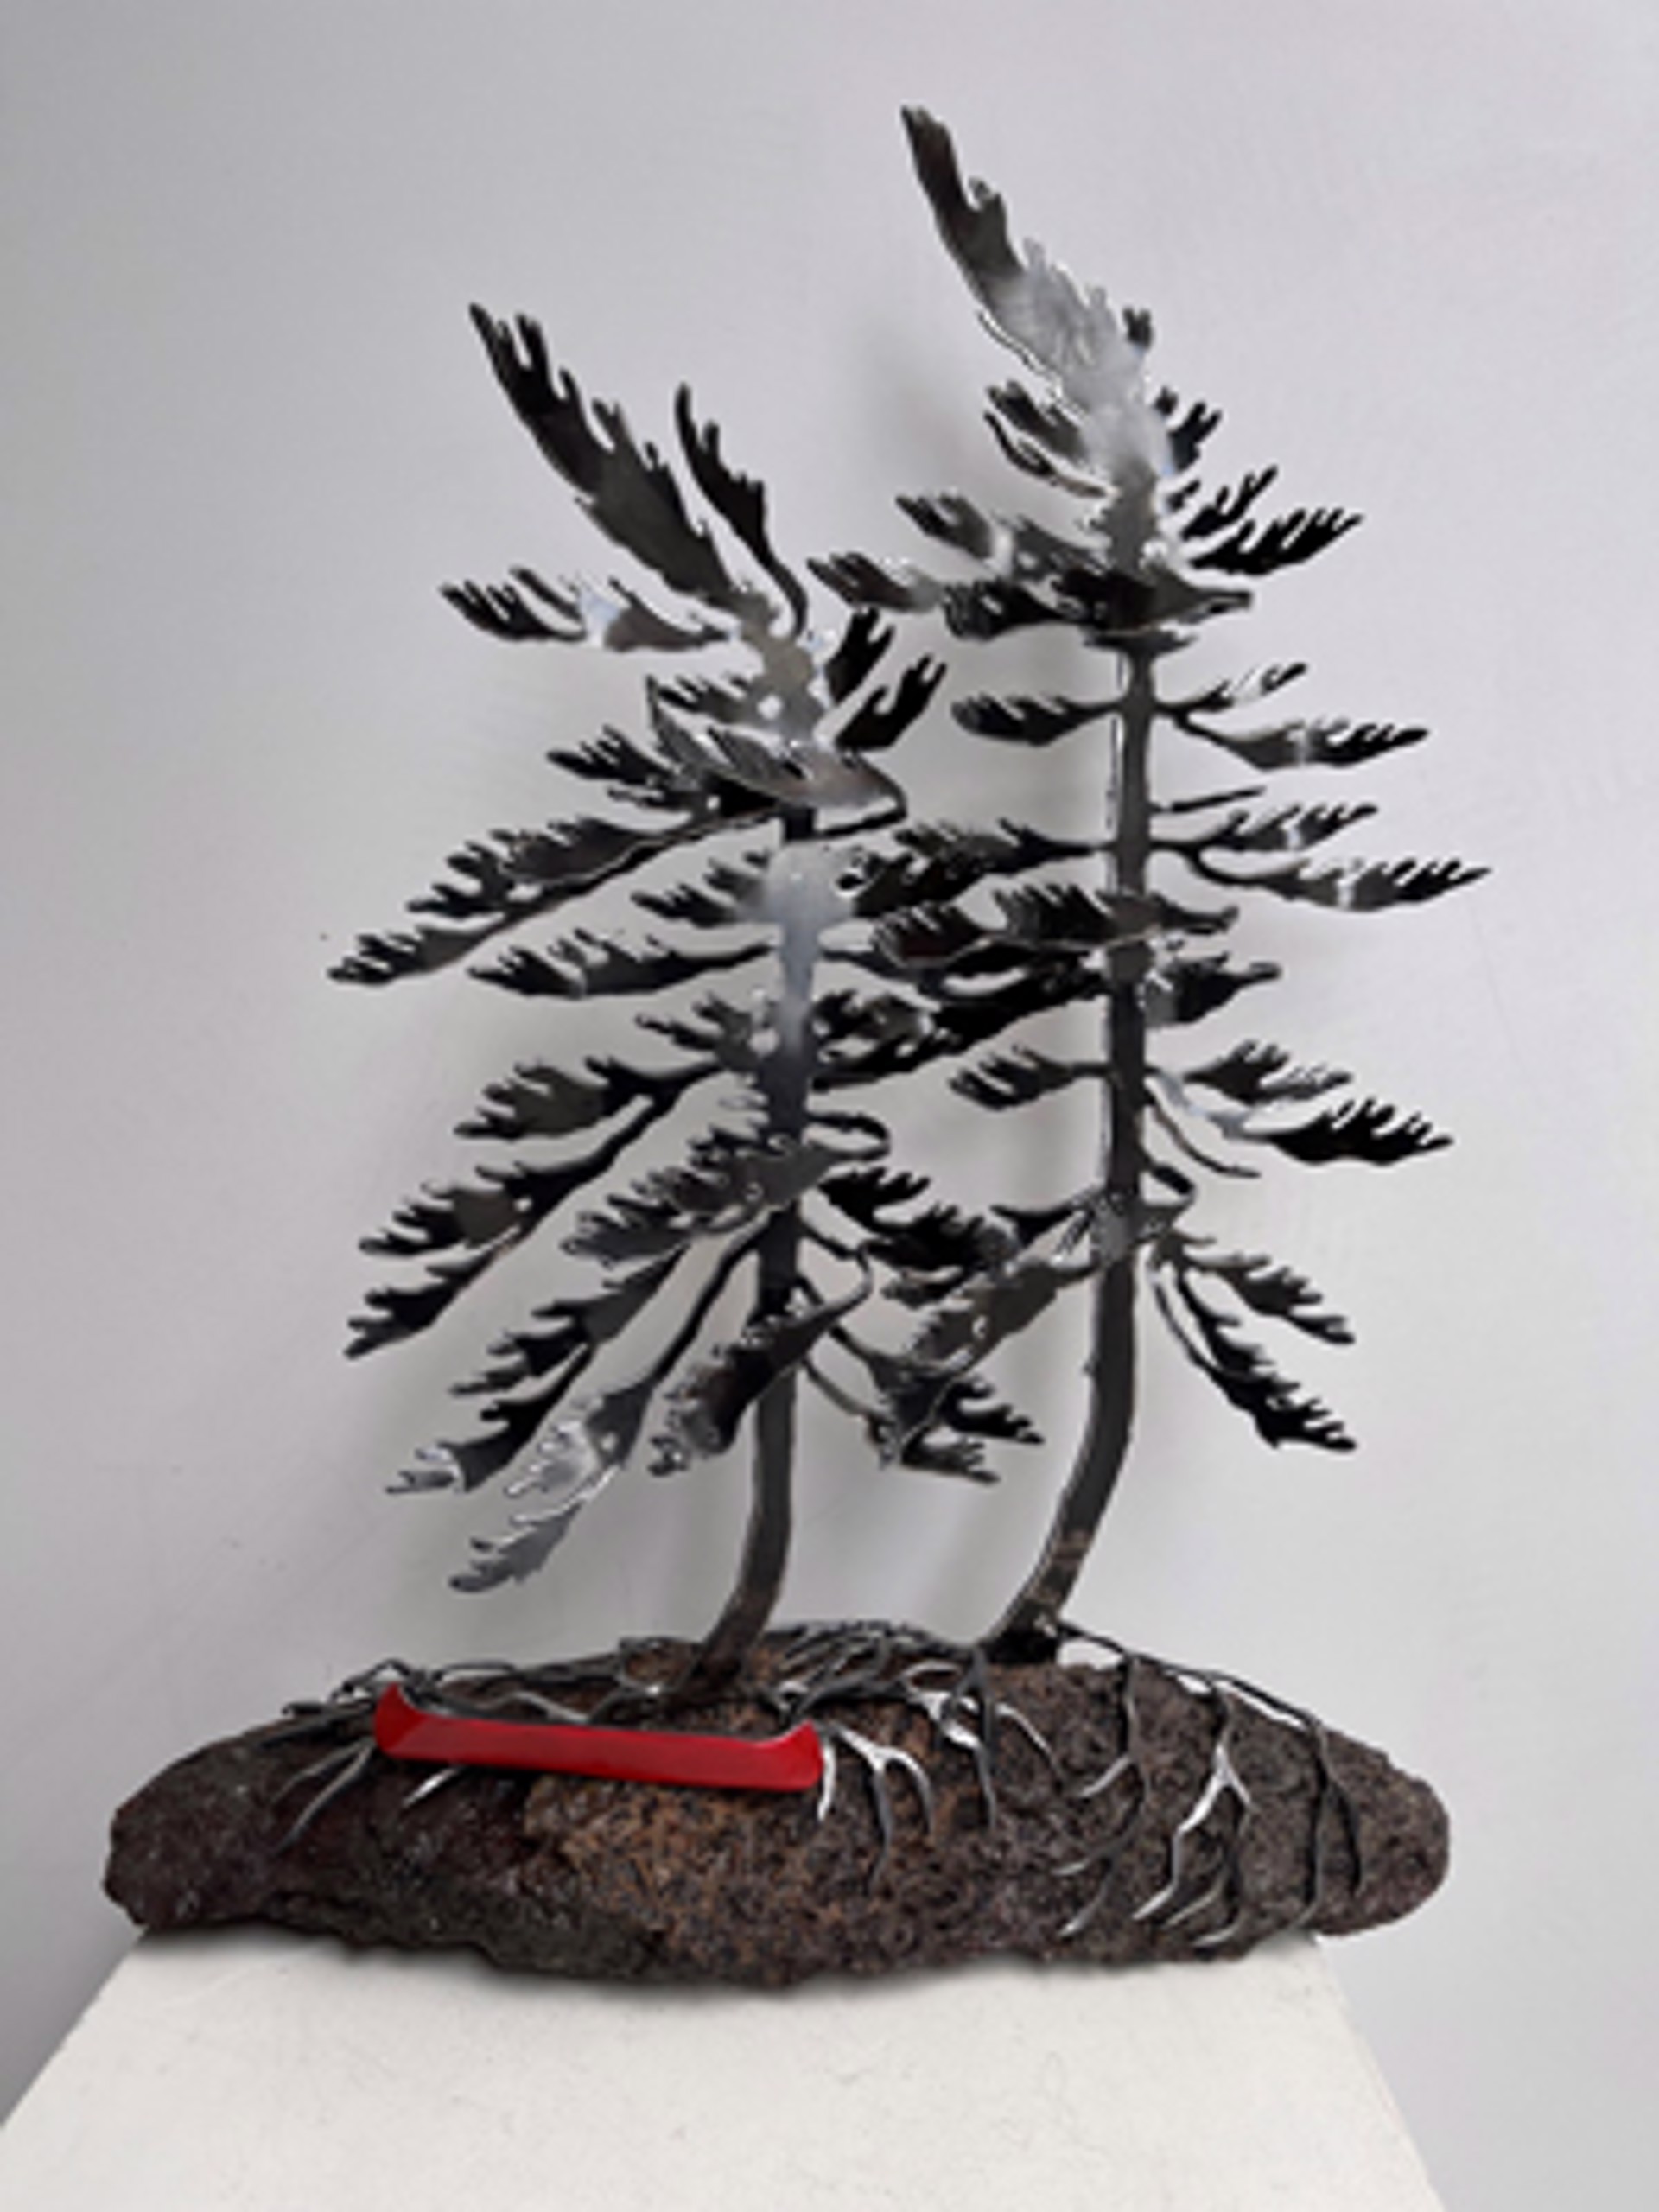 Two Windswept Pine - 1 Canoe 660069 by Cathy Mark